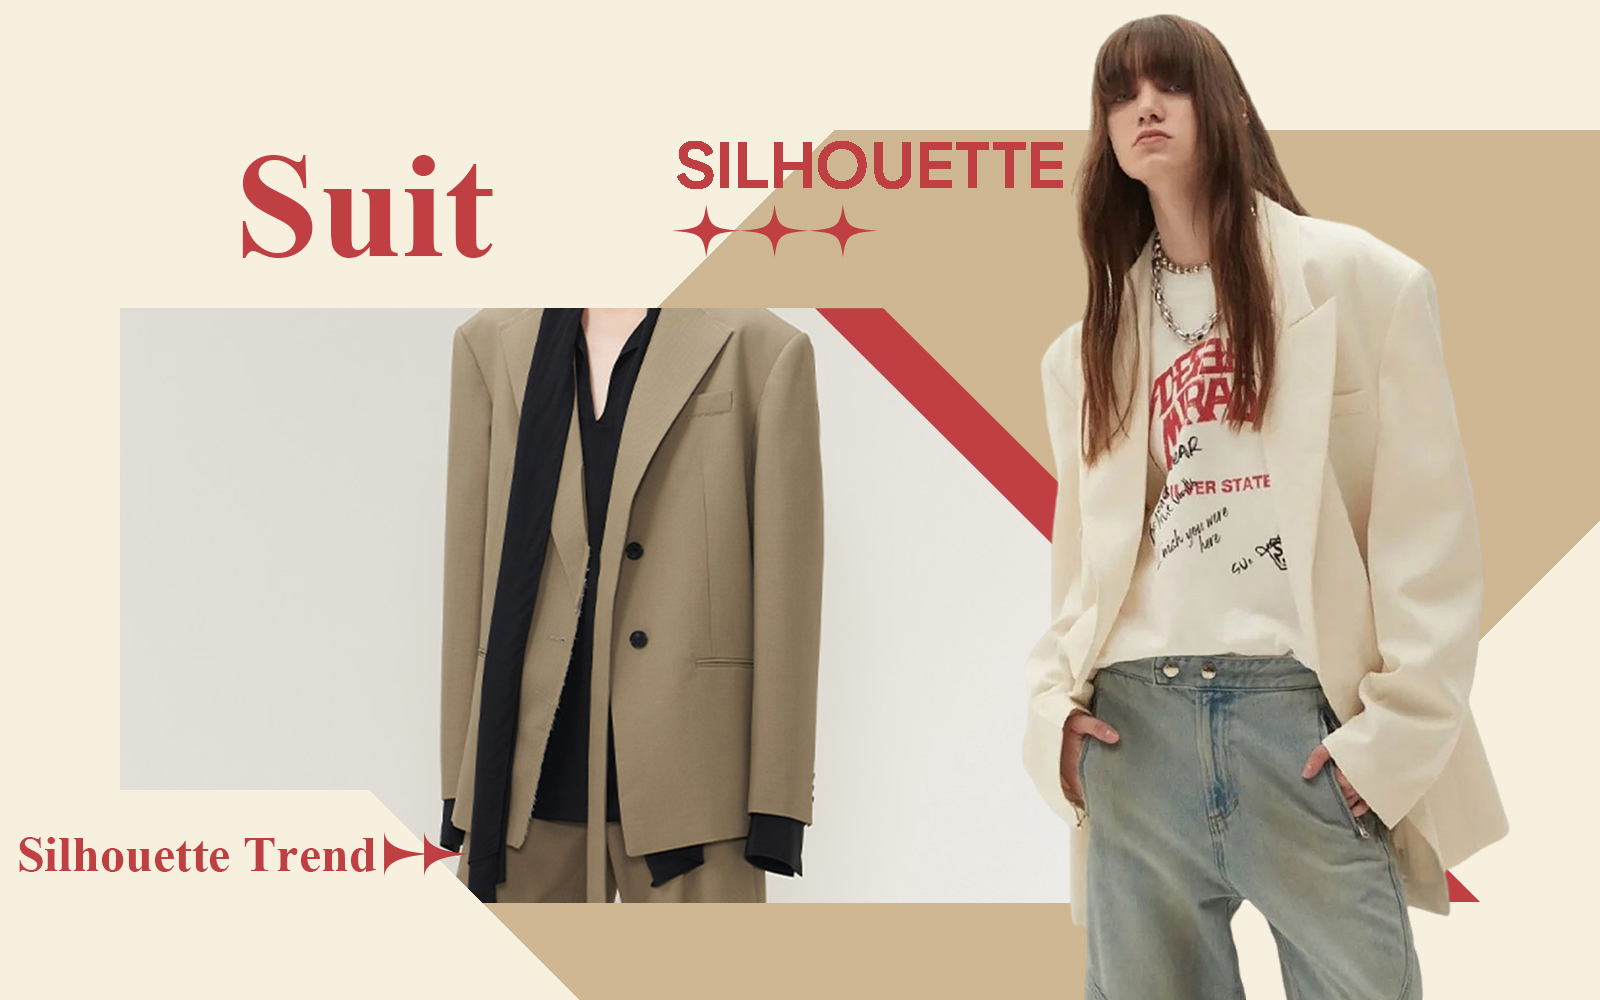 The Silhouette Trend for Women's Suit